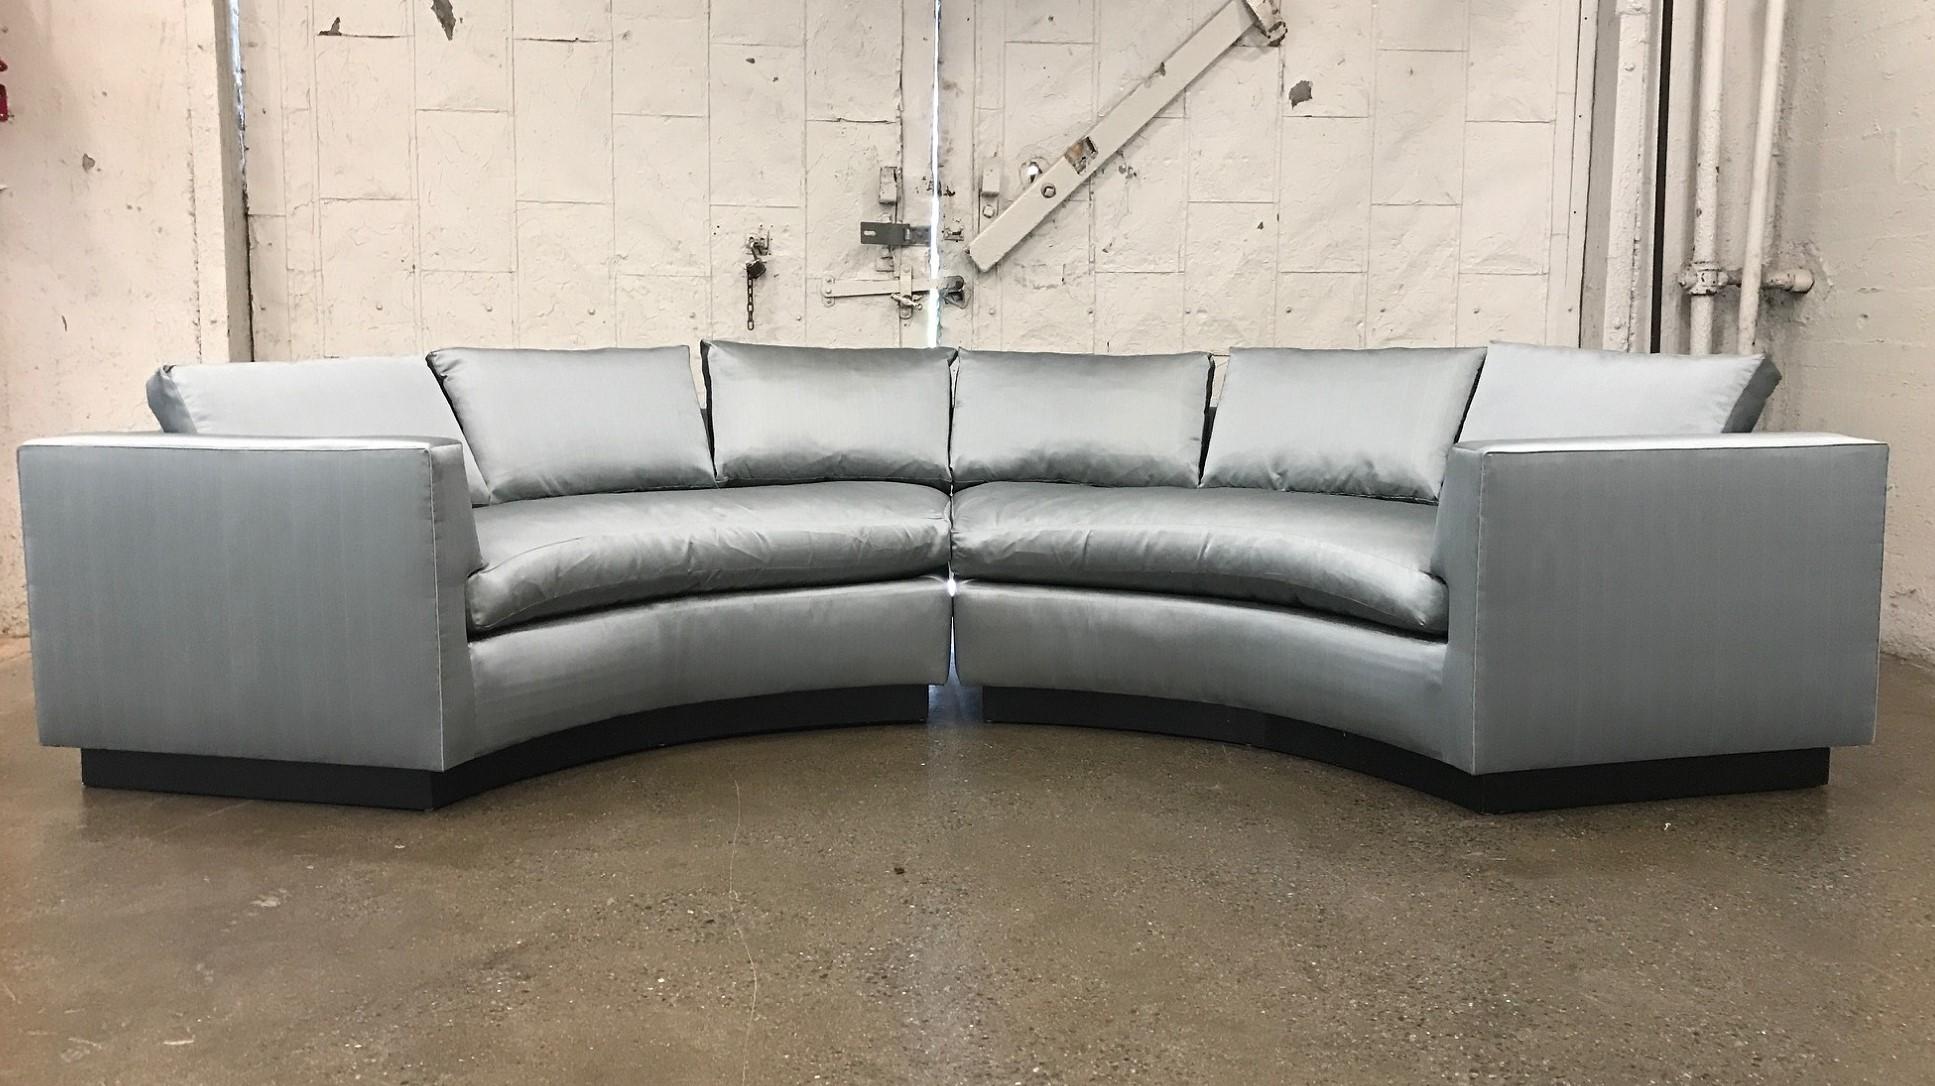 Two-piece sofa sectional in satin with a black lacquered wooden base. The loose cushions are down. Milo Baughman style.
Each sectional measures: Mid Century Modern.
Measures: 87 W x 41 D x 34.5 H (height is to the top of back cushions).
 